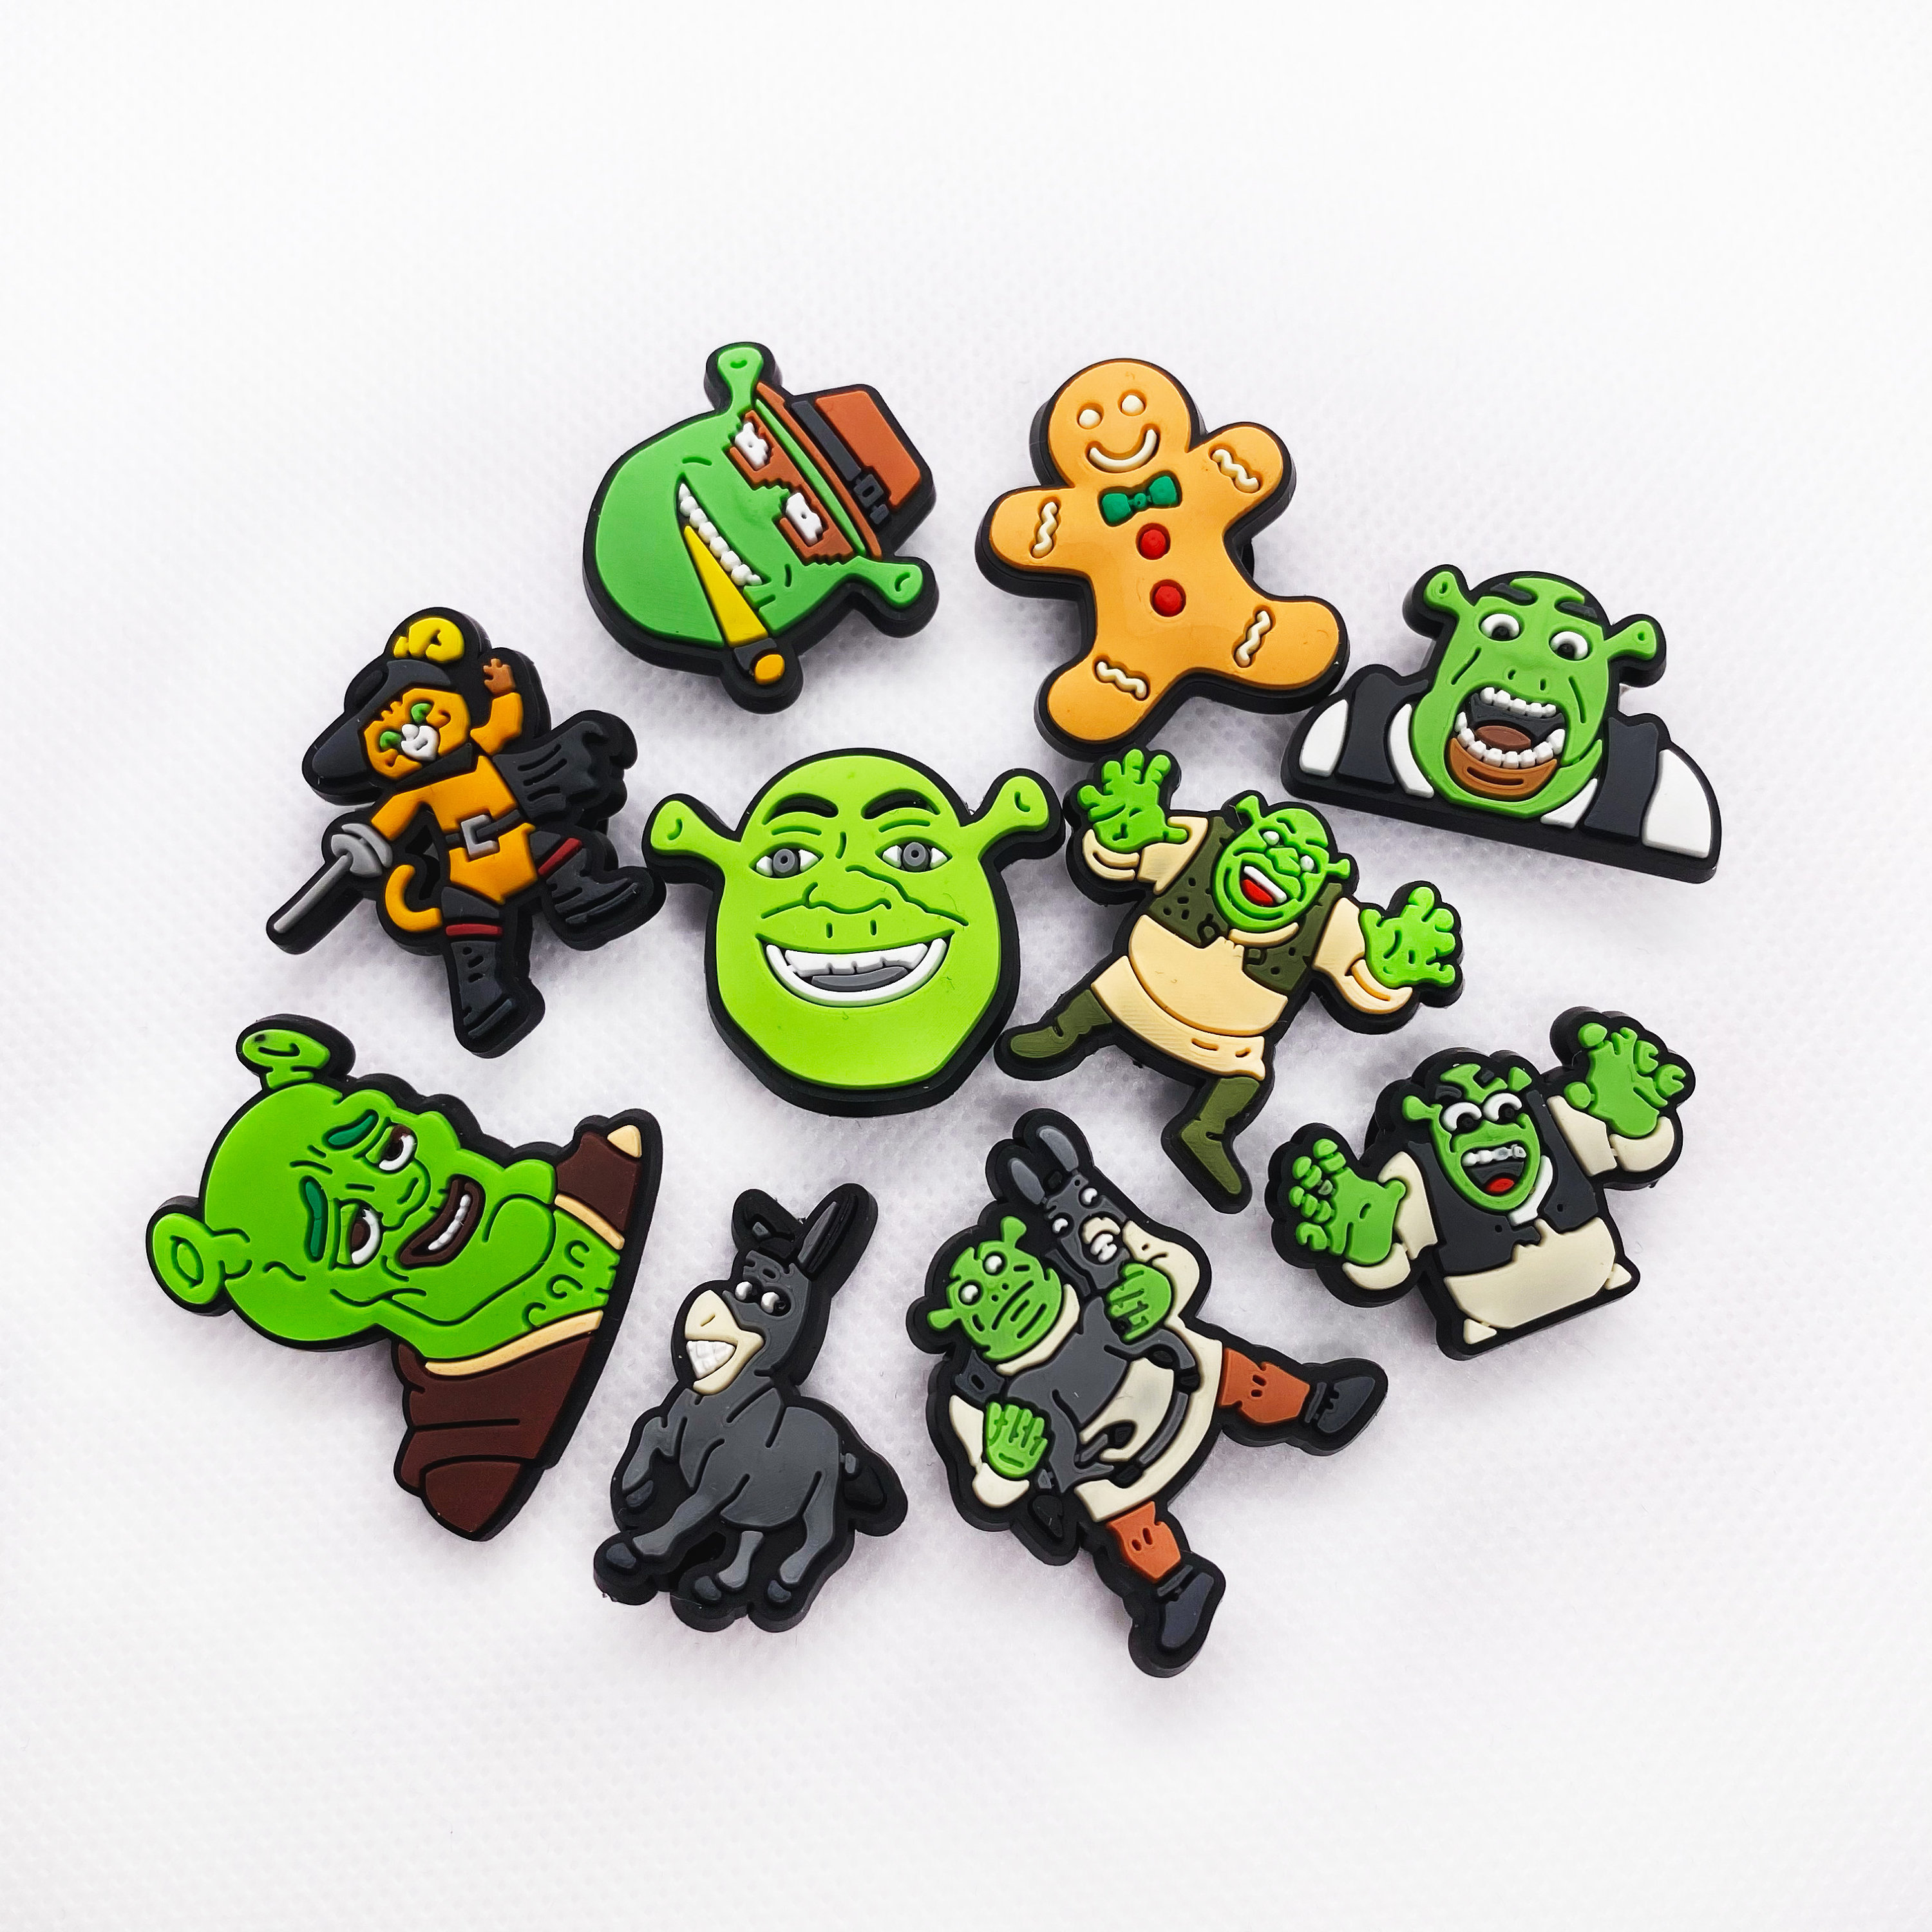 Forfamy Shrek Crocs Charms Green Crocs Charms Shoe Accessories for Kids  Unisex Adult Sandals / Bracelet / Party / Birthday Gifts (Charms Crocs  Set1) : : Fashion